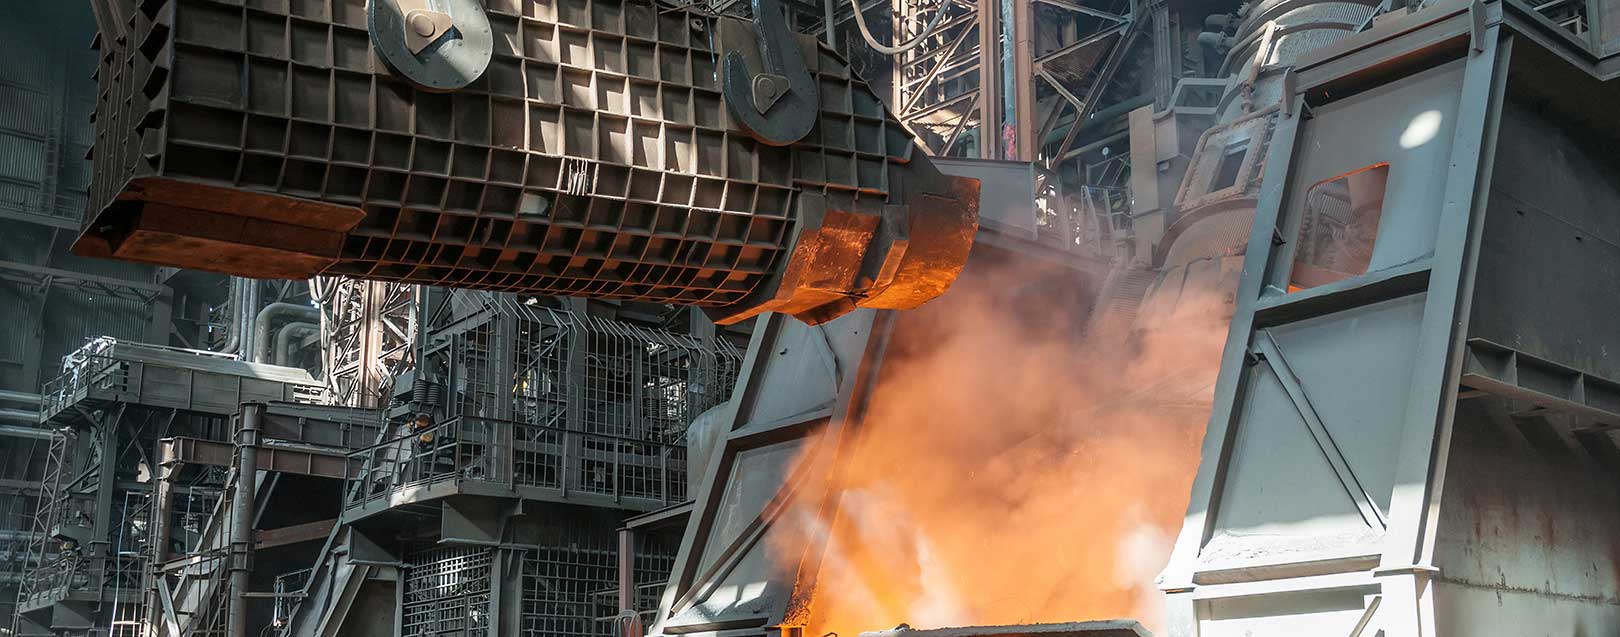 JSW to invest Rs.50,000 crore in Odisha for steel plant